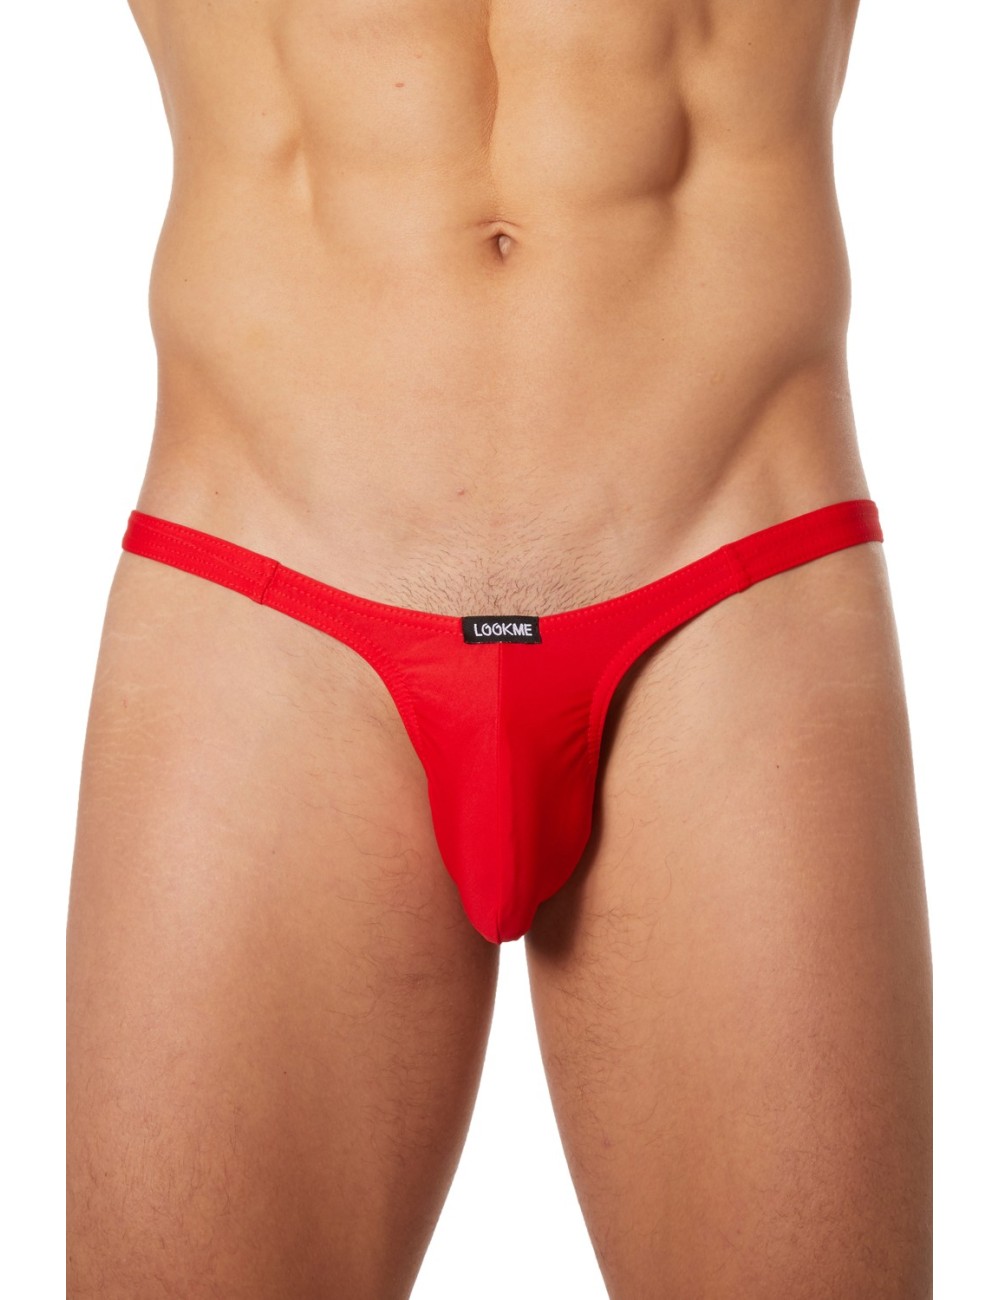 String homme rouge mini - LM2399-96RED